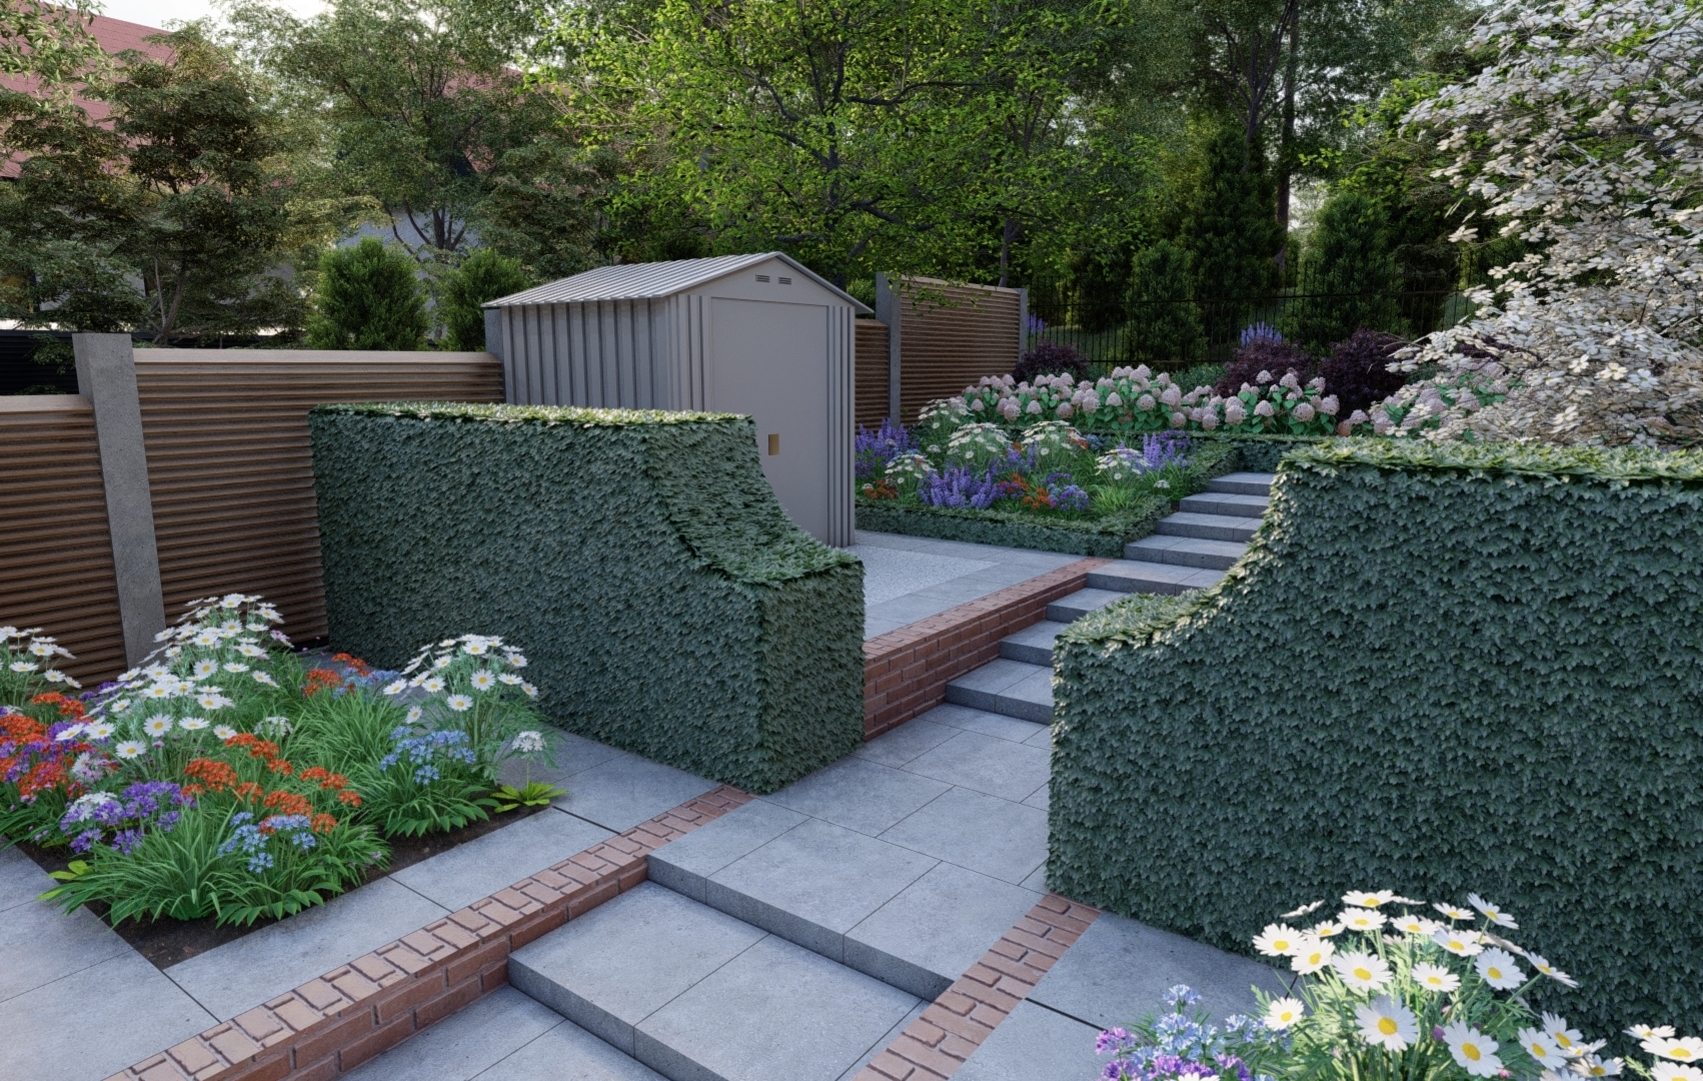 Garden Design Rathfarnham | a clever terraced layout providing easy access to beautiful planting schemes